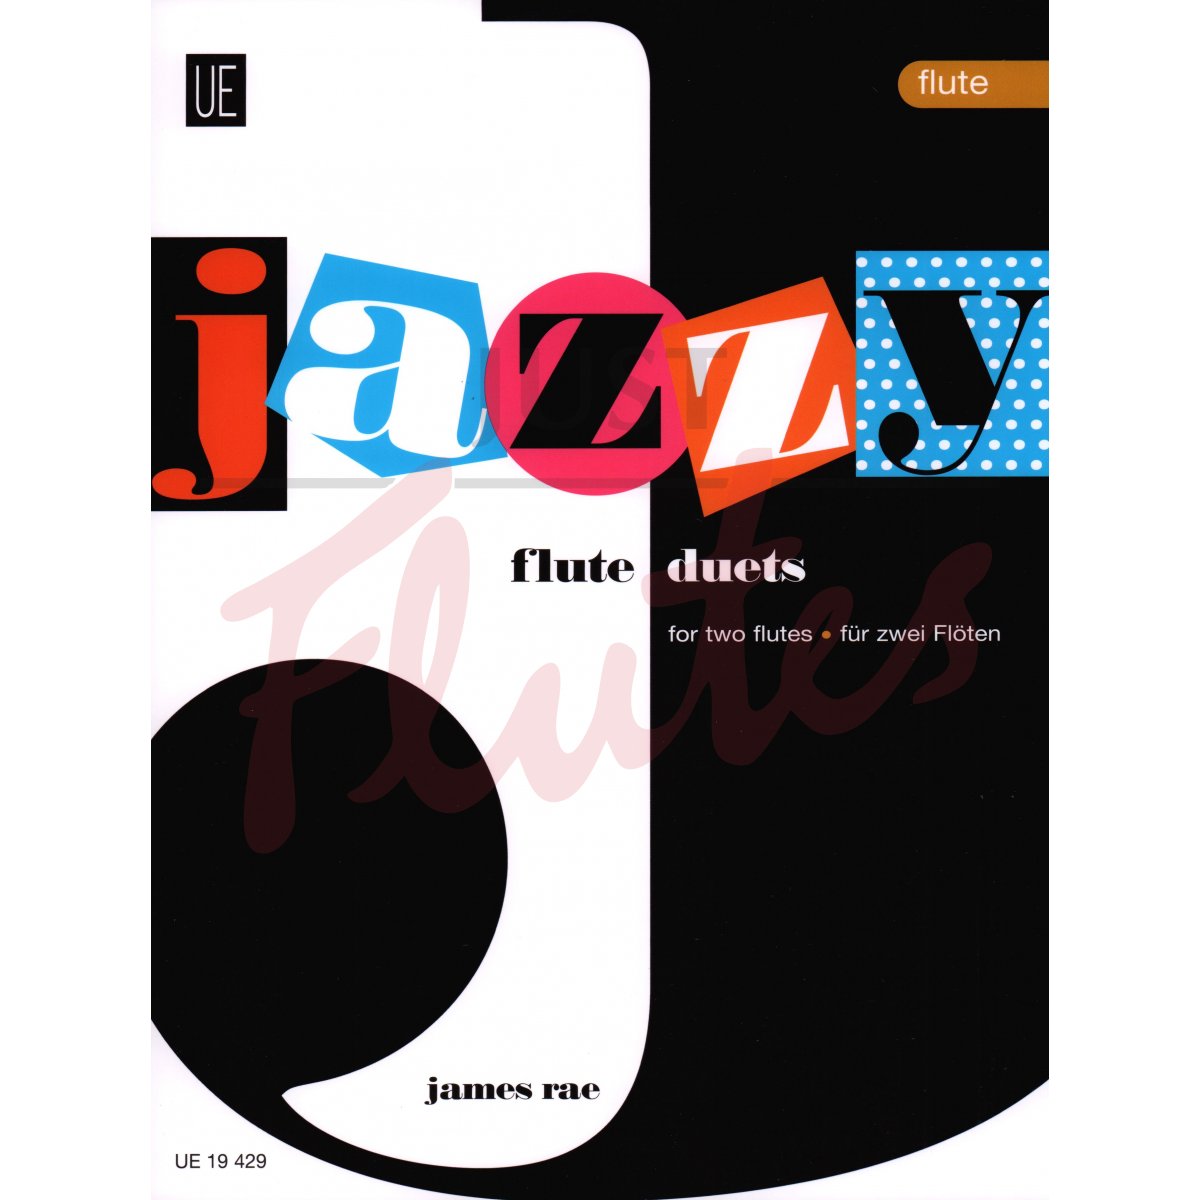 Jazzy Flute Duets